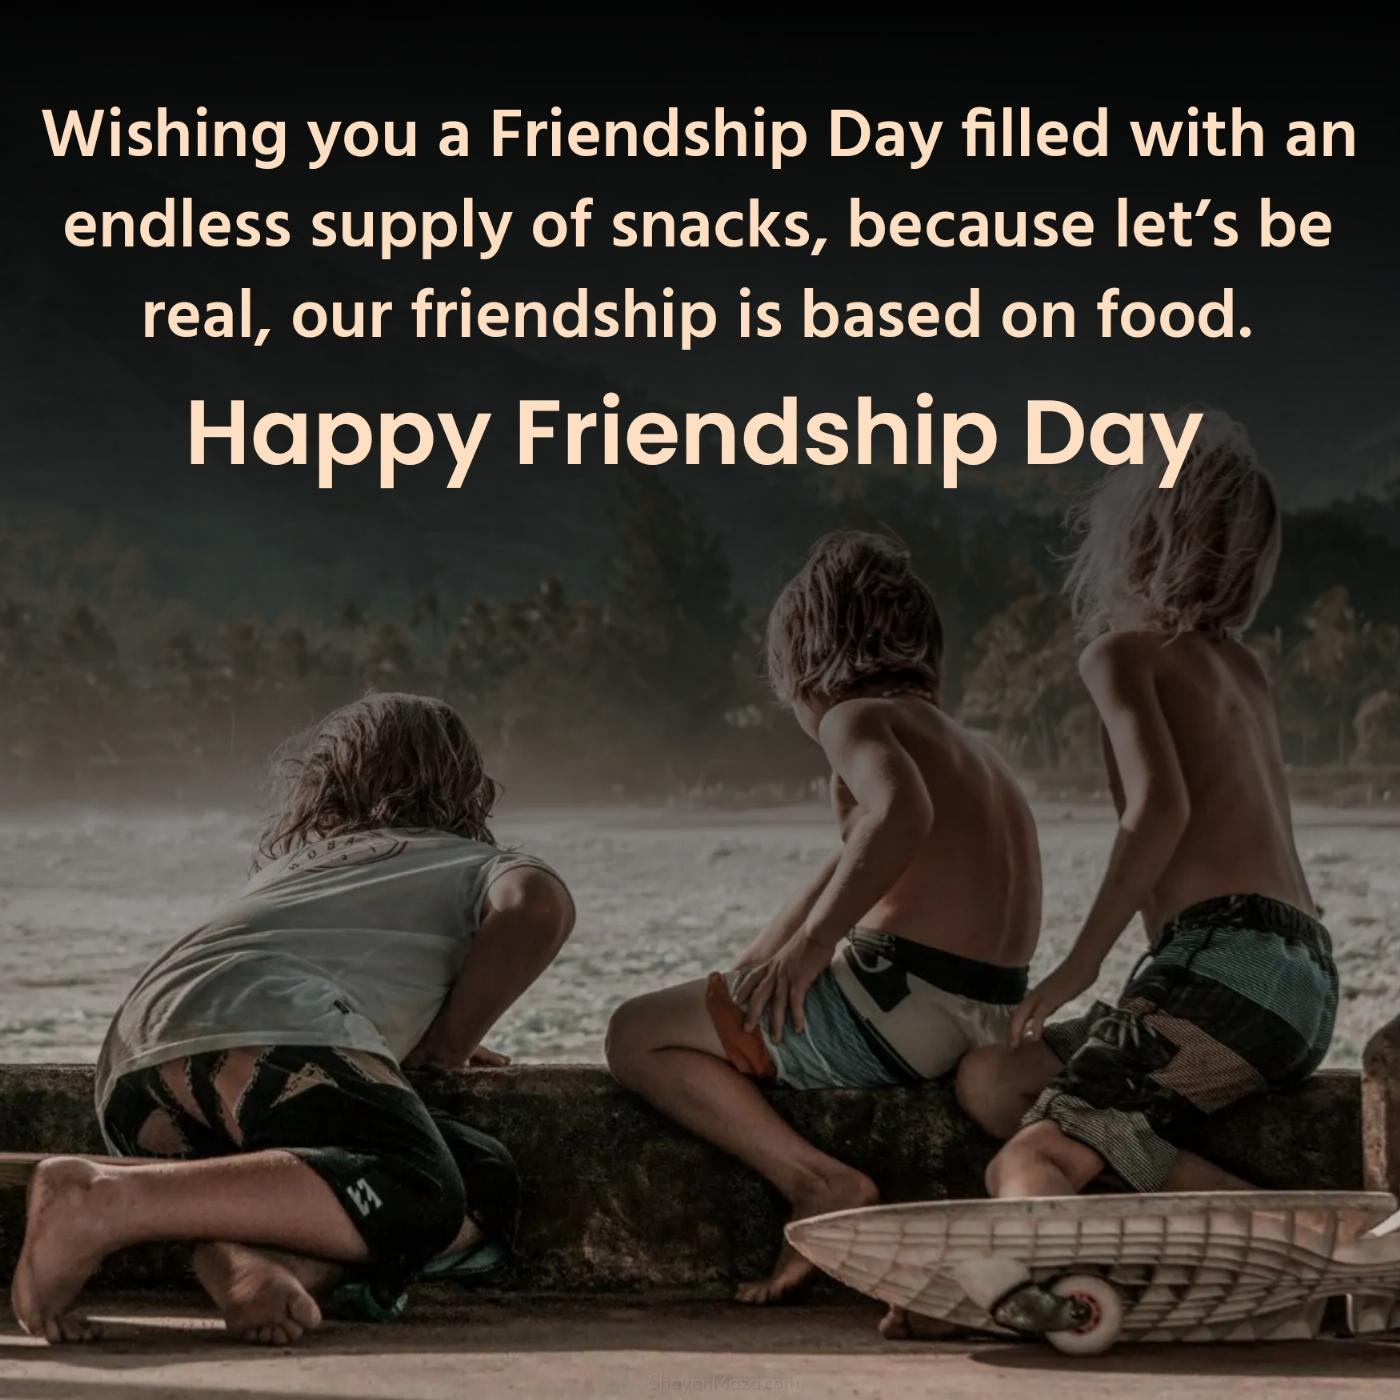 Wishing you a Friendship Day filled with an endless supply of snacks